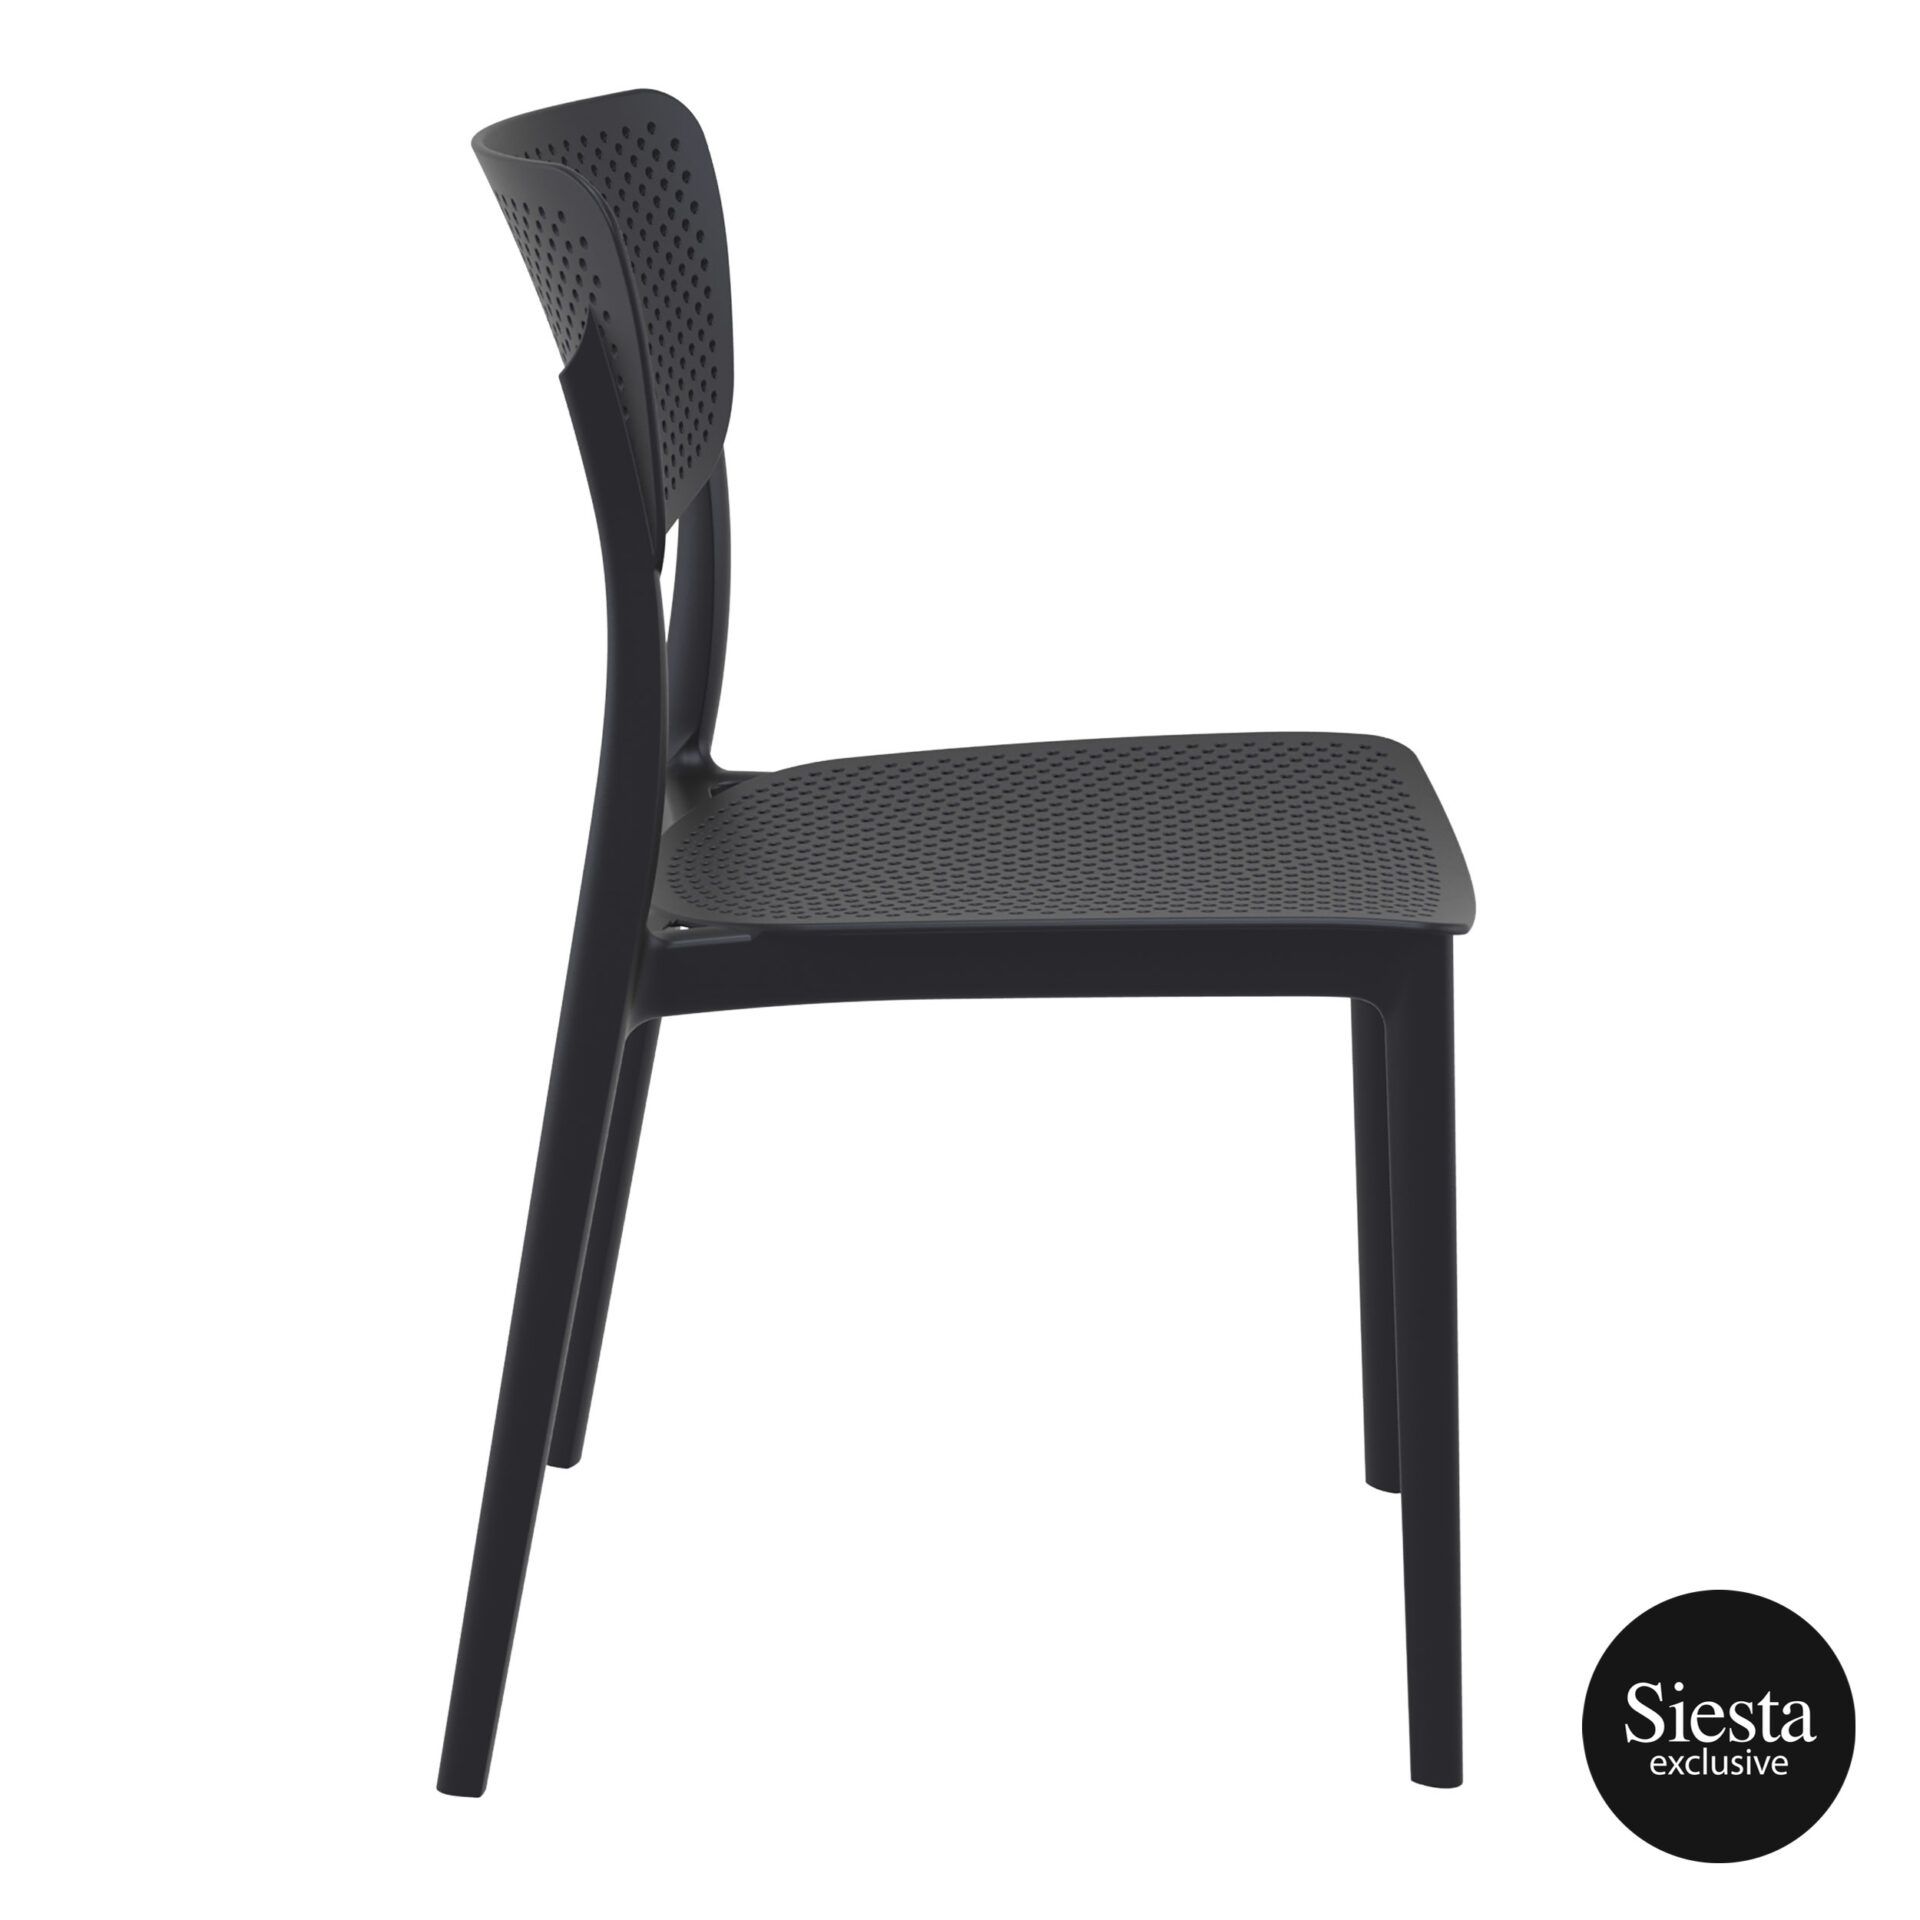 polypropylene hospitality seating lucy chair black side 1